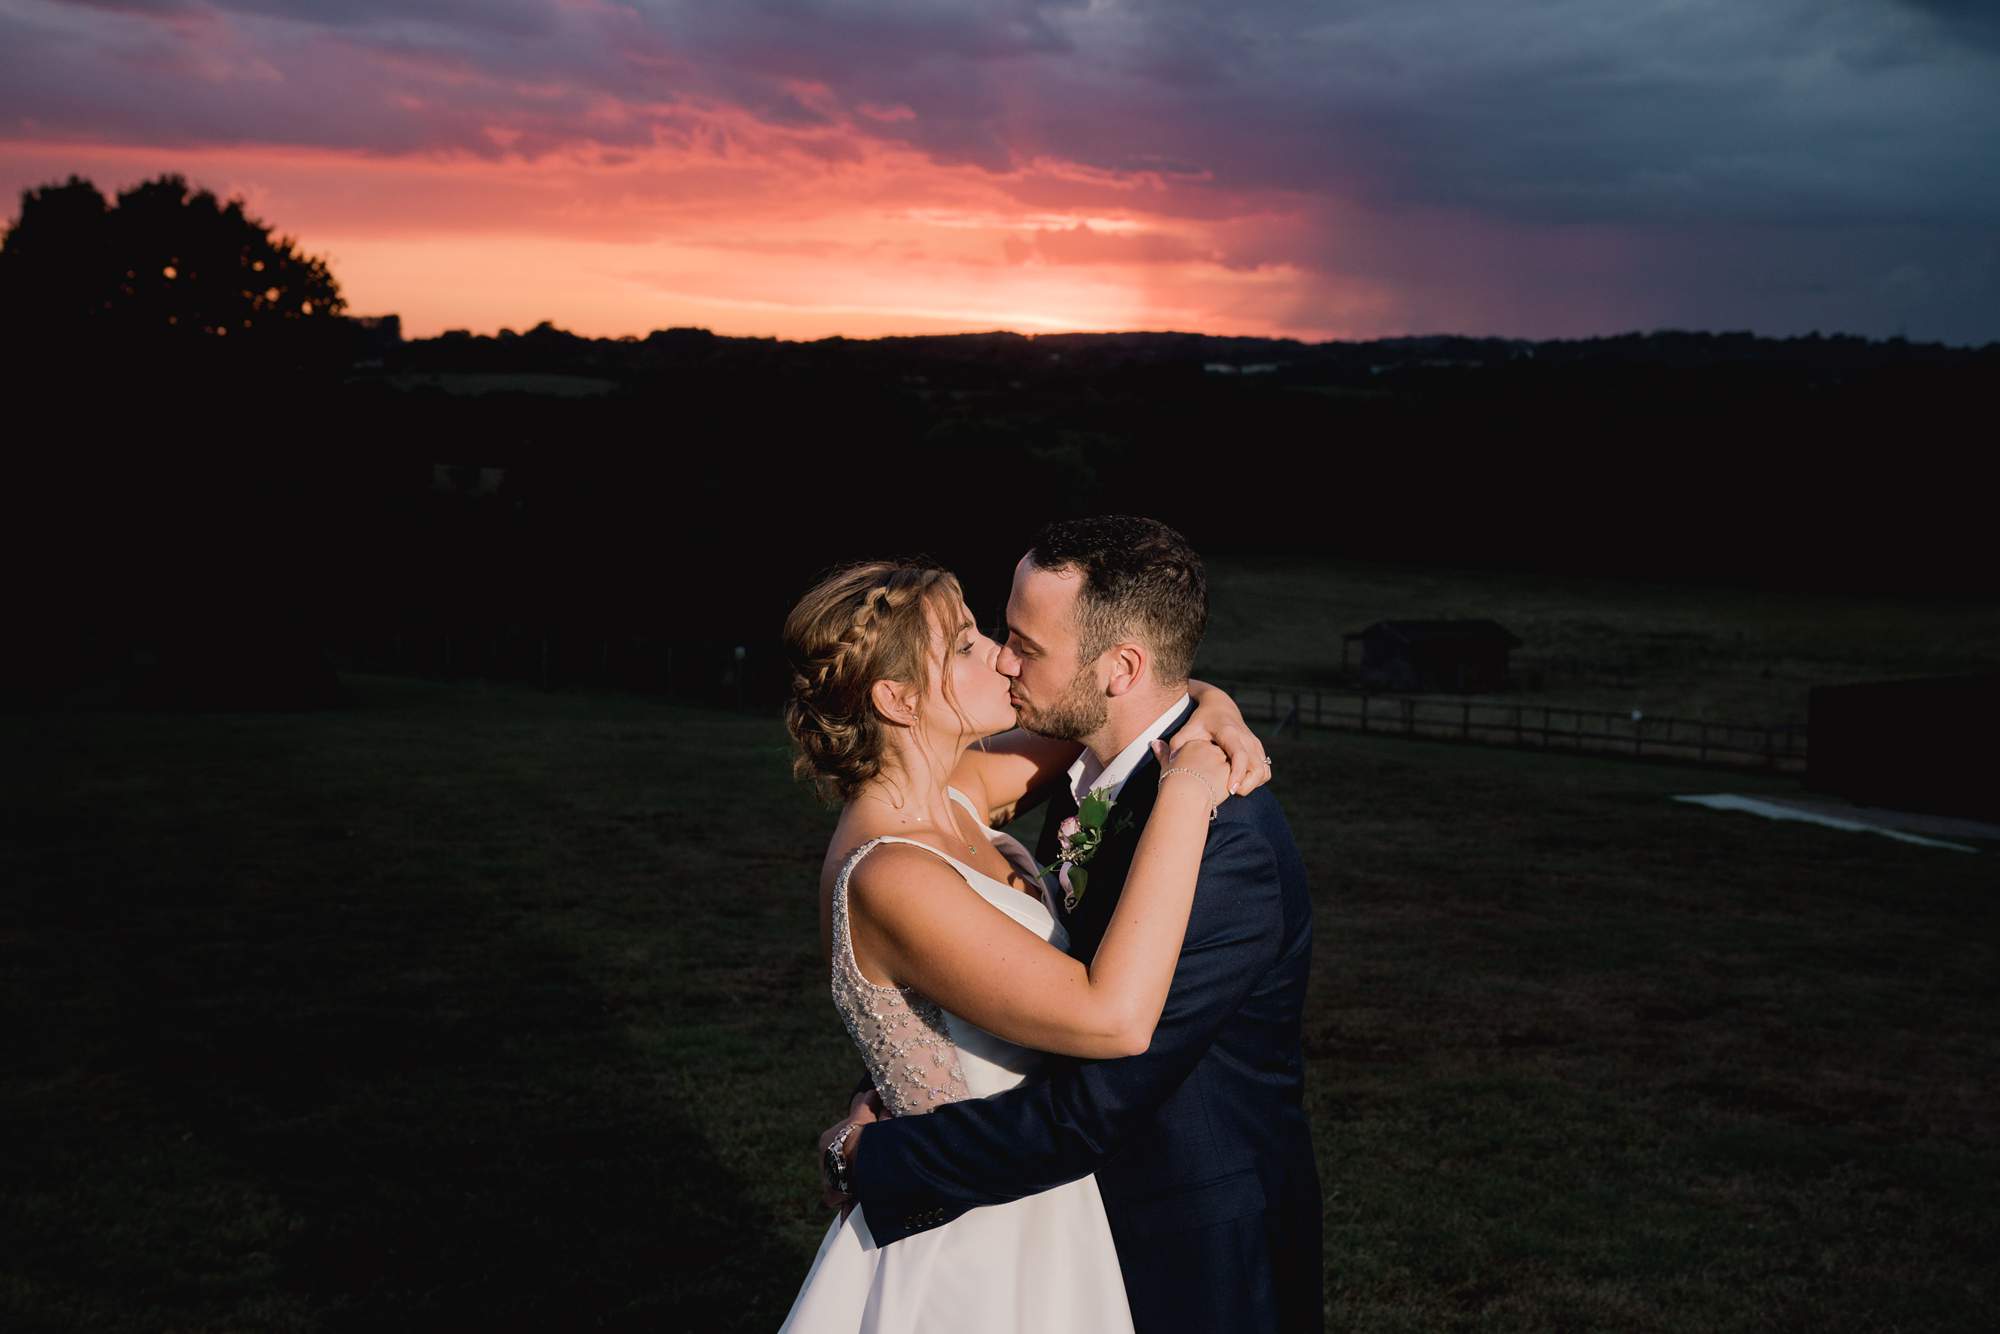 Blackstock Country Estate in Sussex Amazing Sunset with Bride and Groom